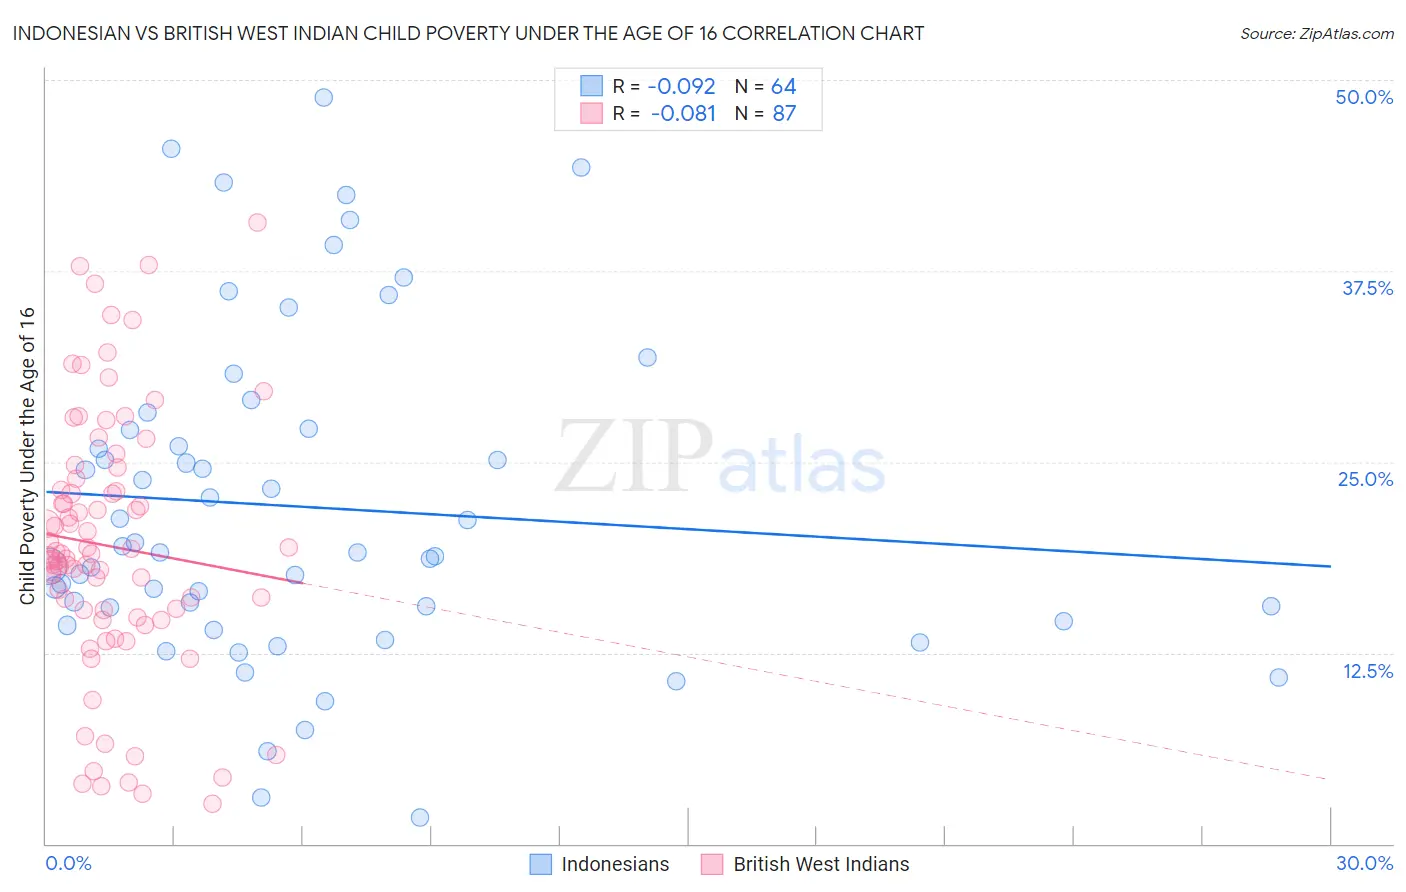 Indonesian vs British West Indian Child Poverty Under the Age of 16